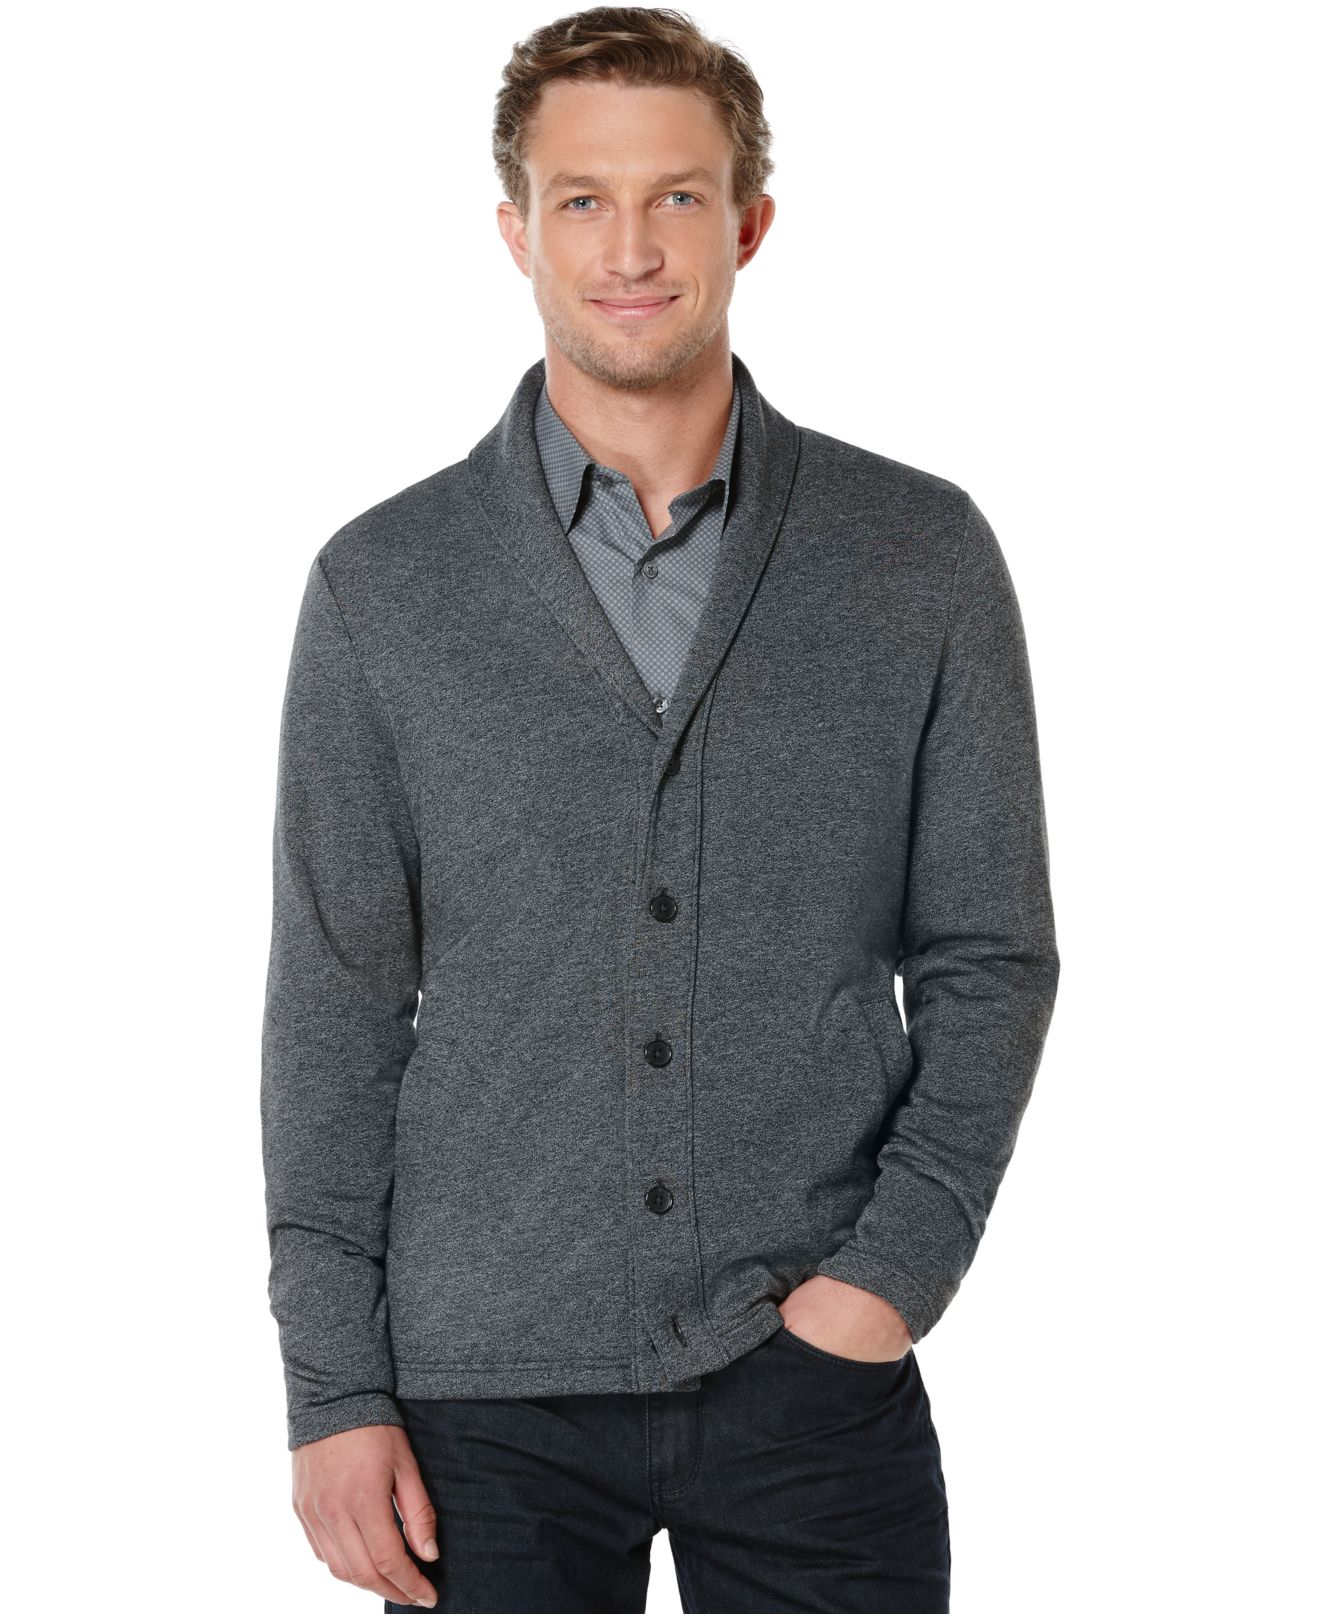 Lyst - Perry Ellis Shawl Collar Button-front Cardigan Sweater in Black ...